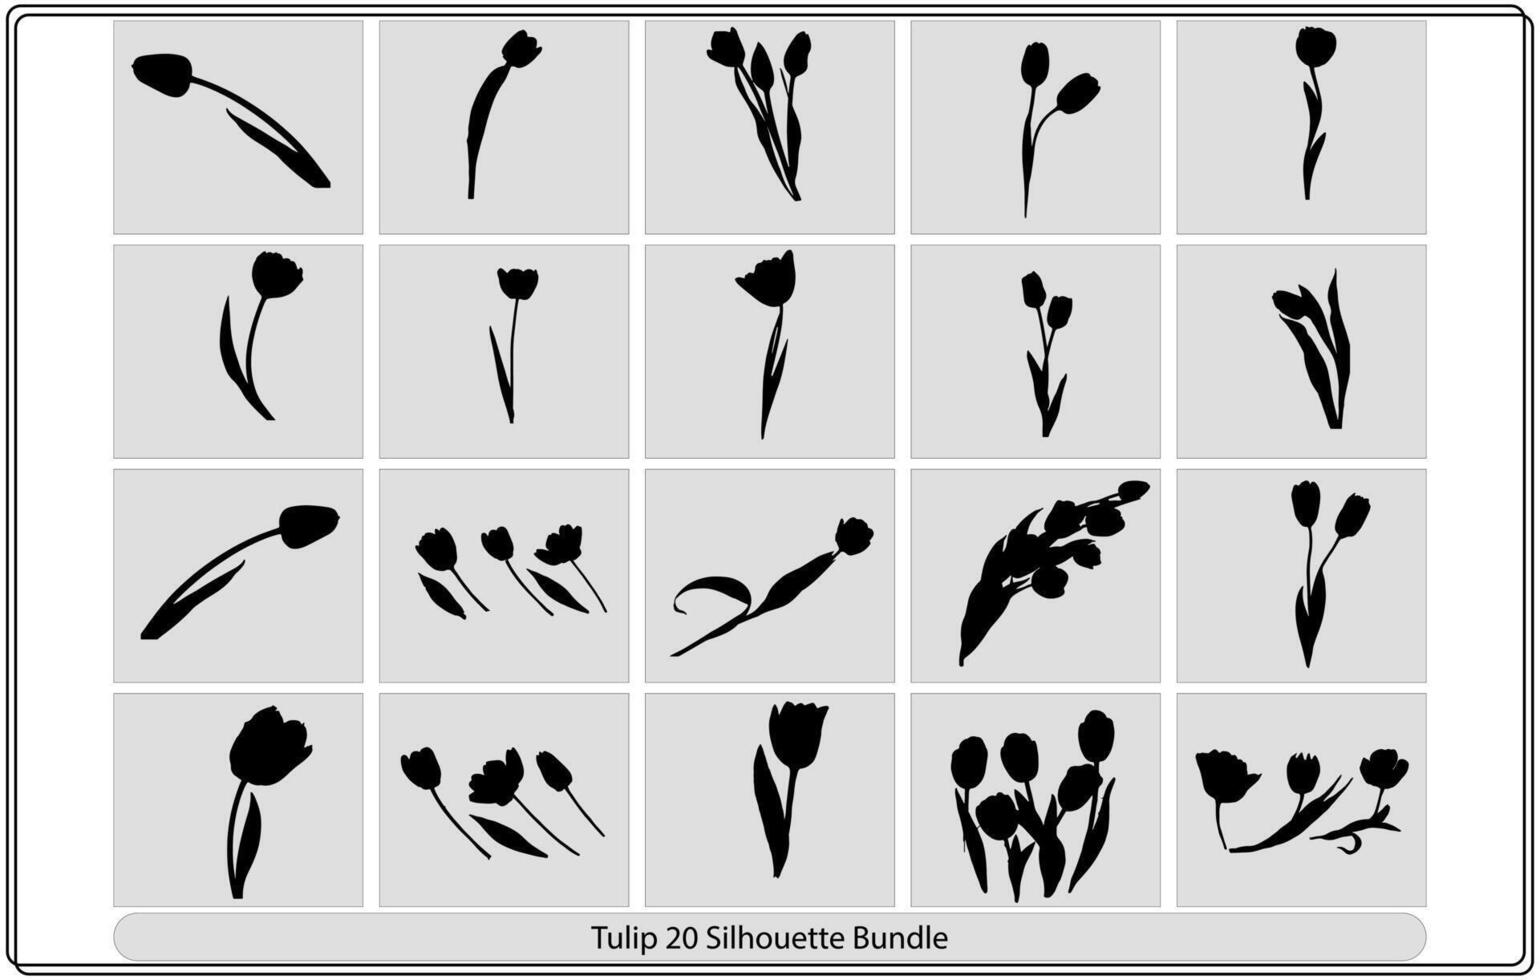 Vector black silhouettes of spring flowers tulips, narcissus and iris isolated on a white background.